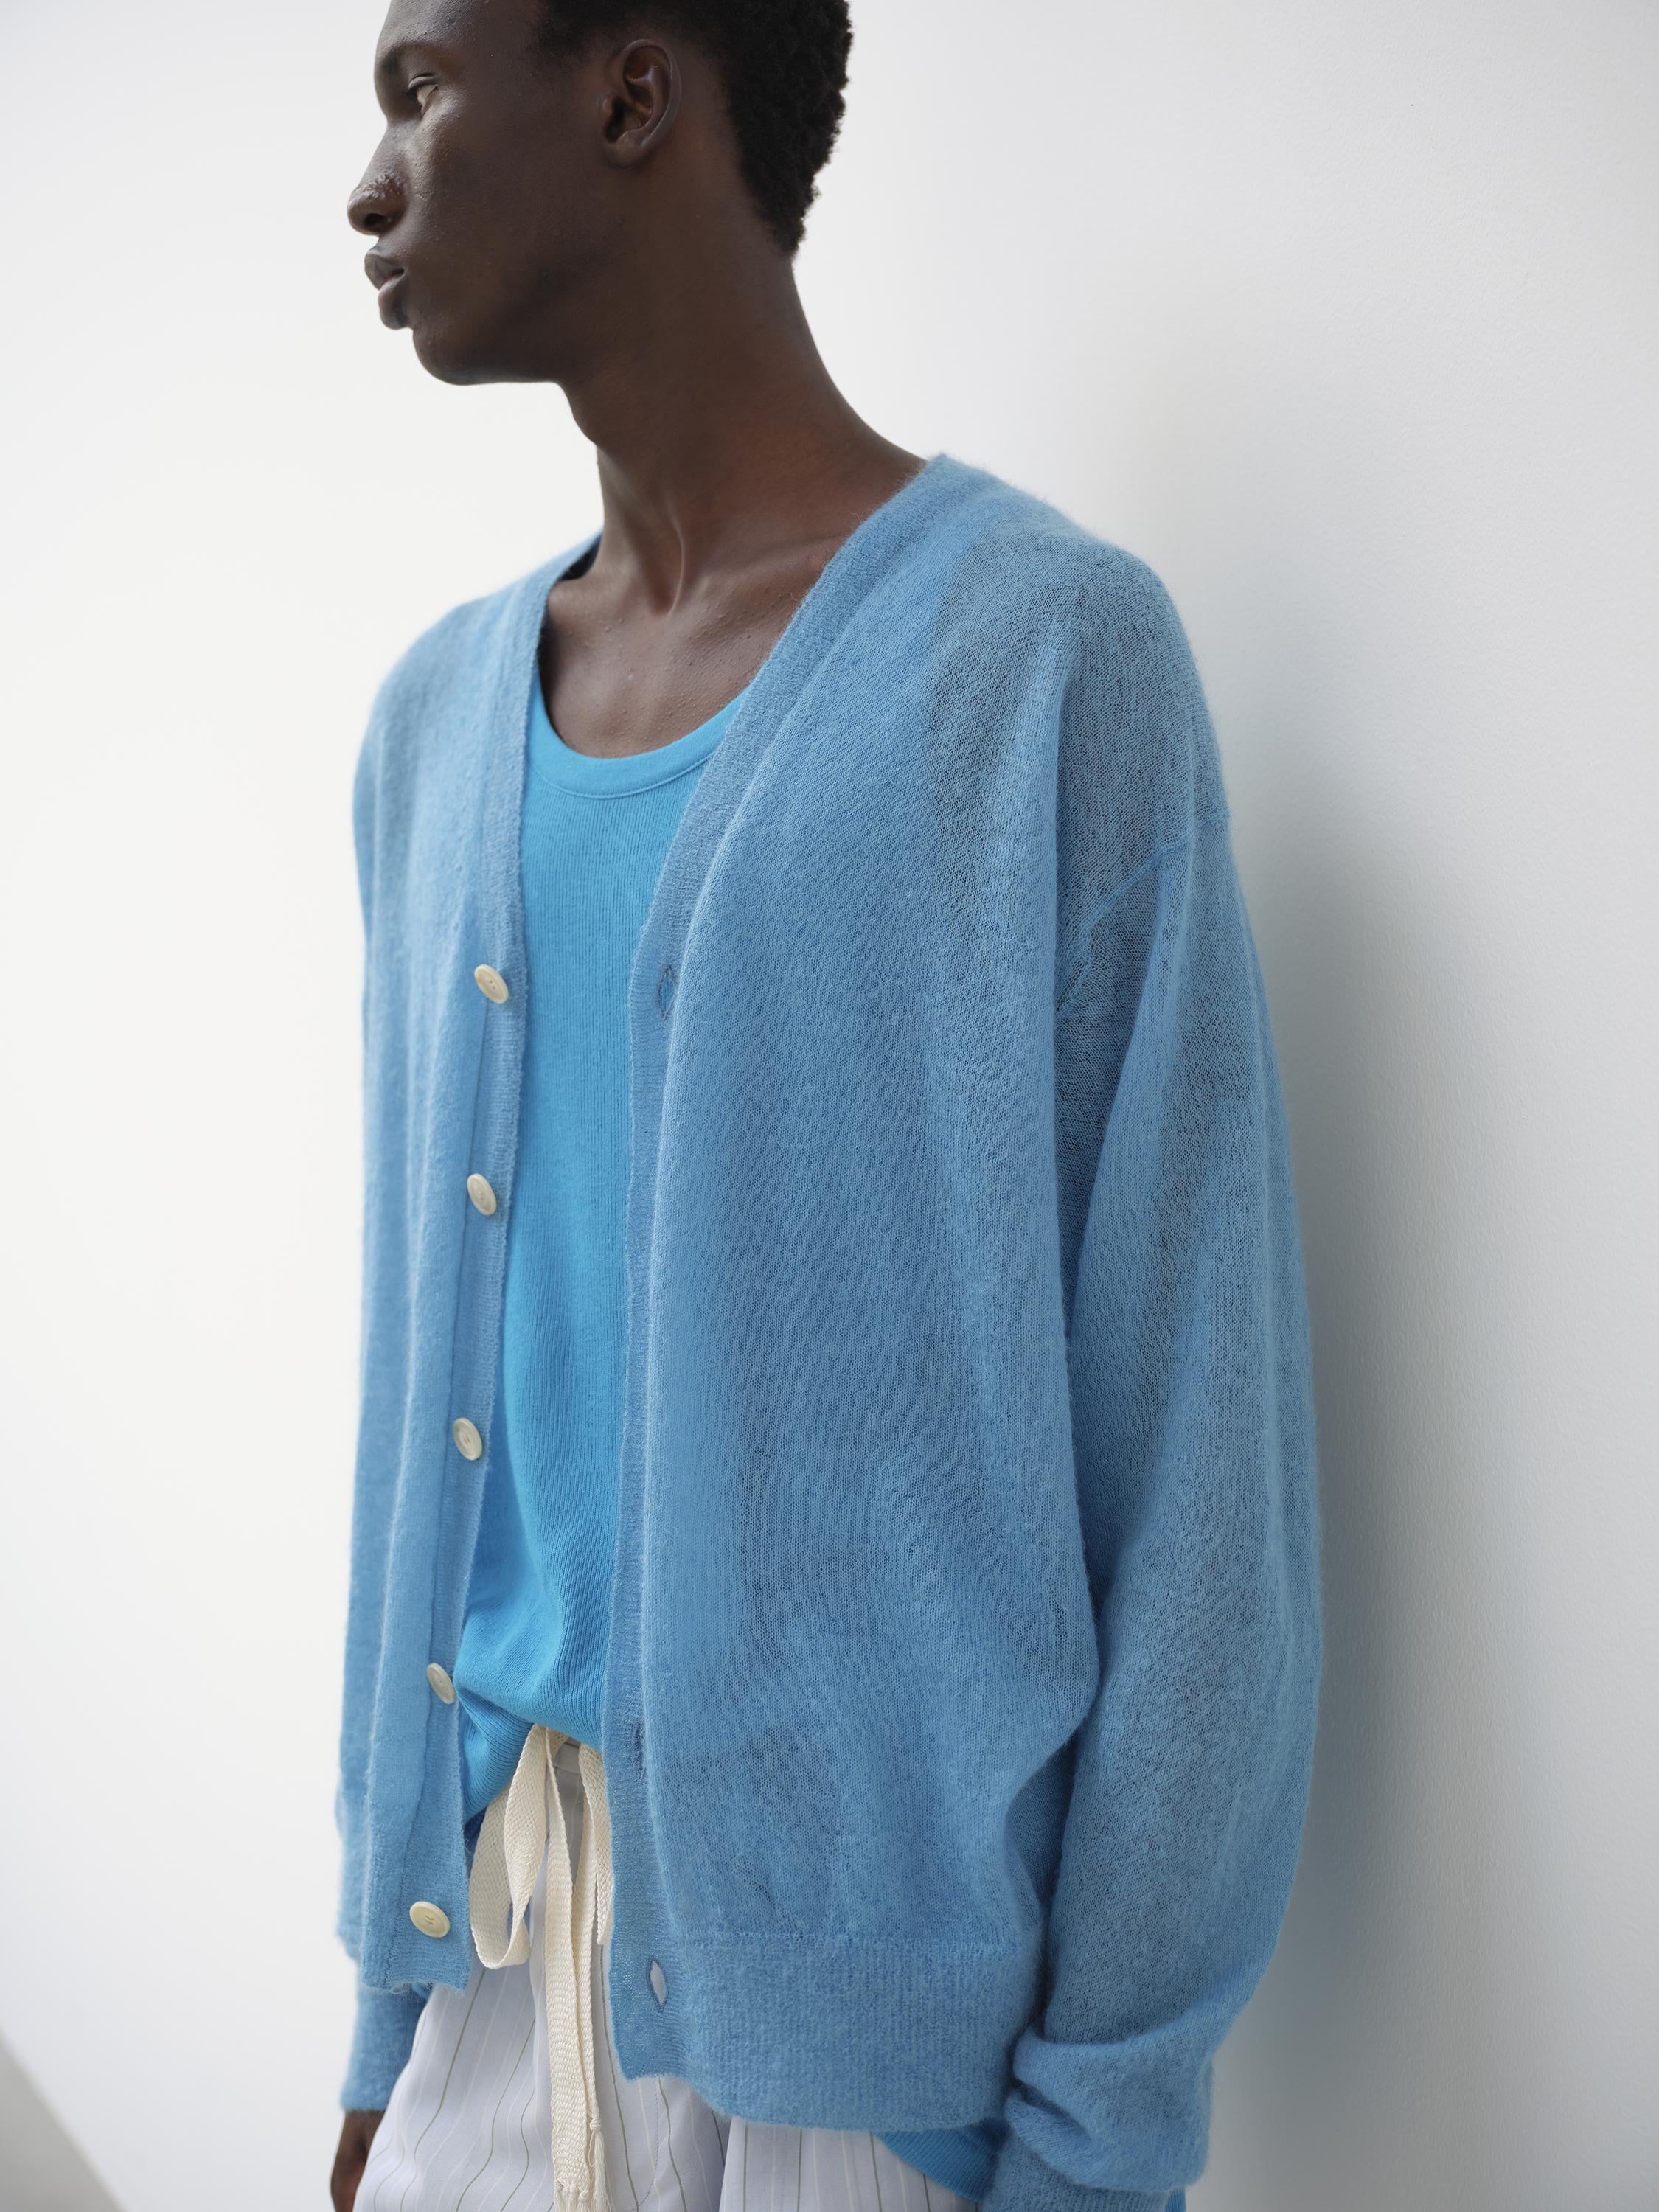 KID MOHAIR SHEER KNIT CARDIGAN 詳細画像 TURQUOISE BLUE 3